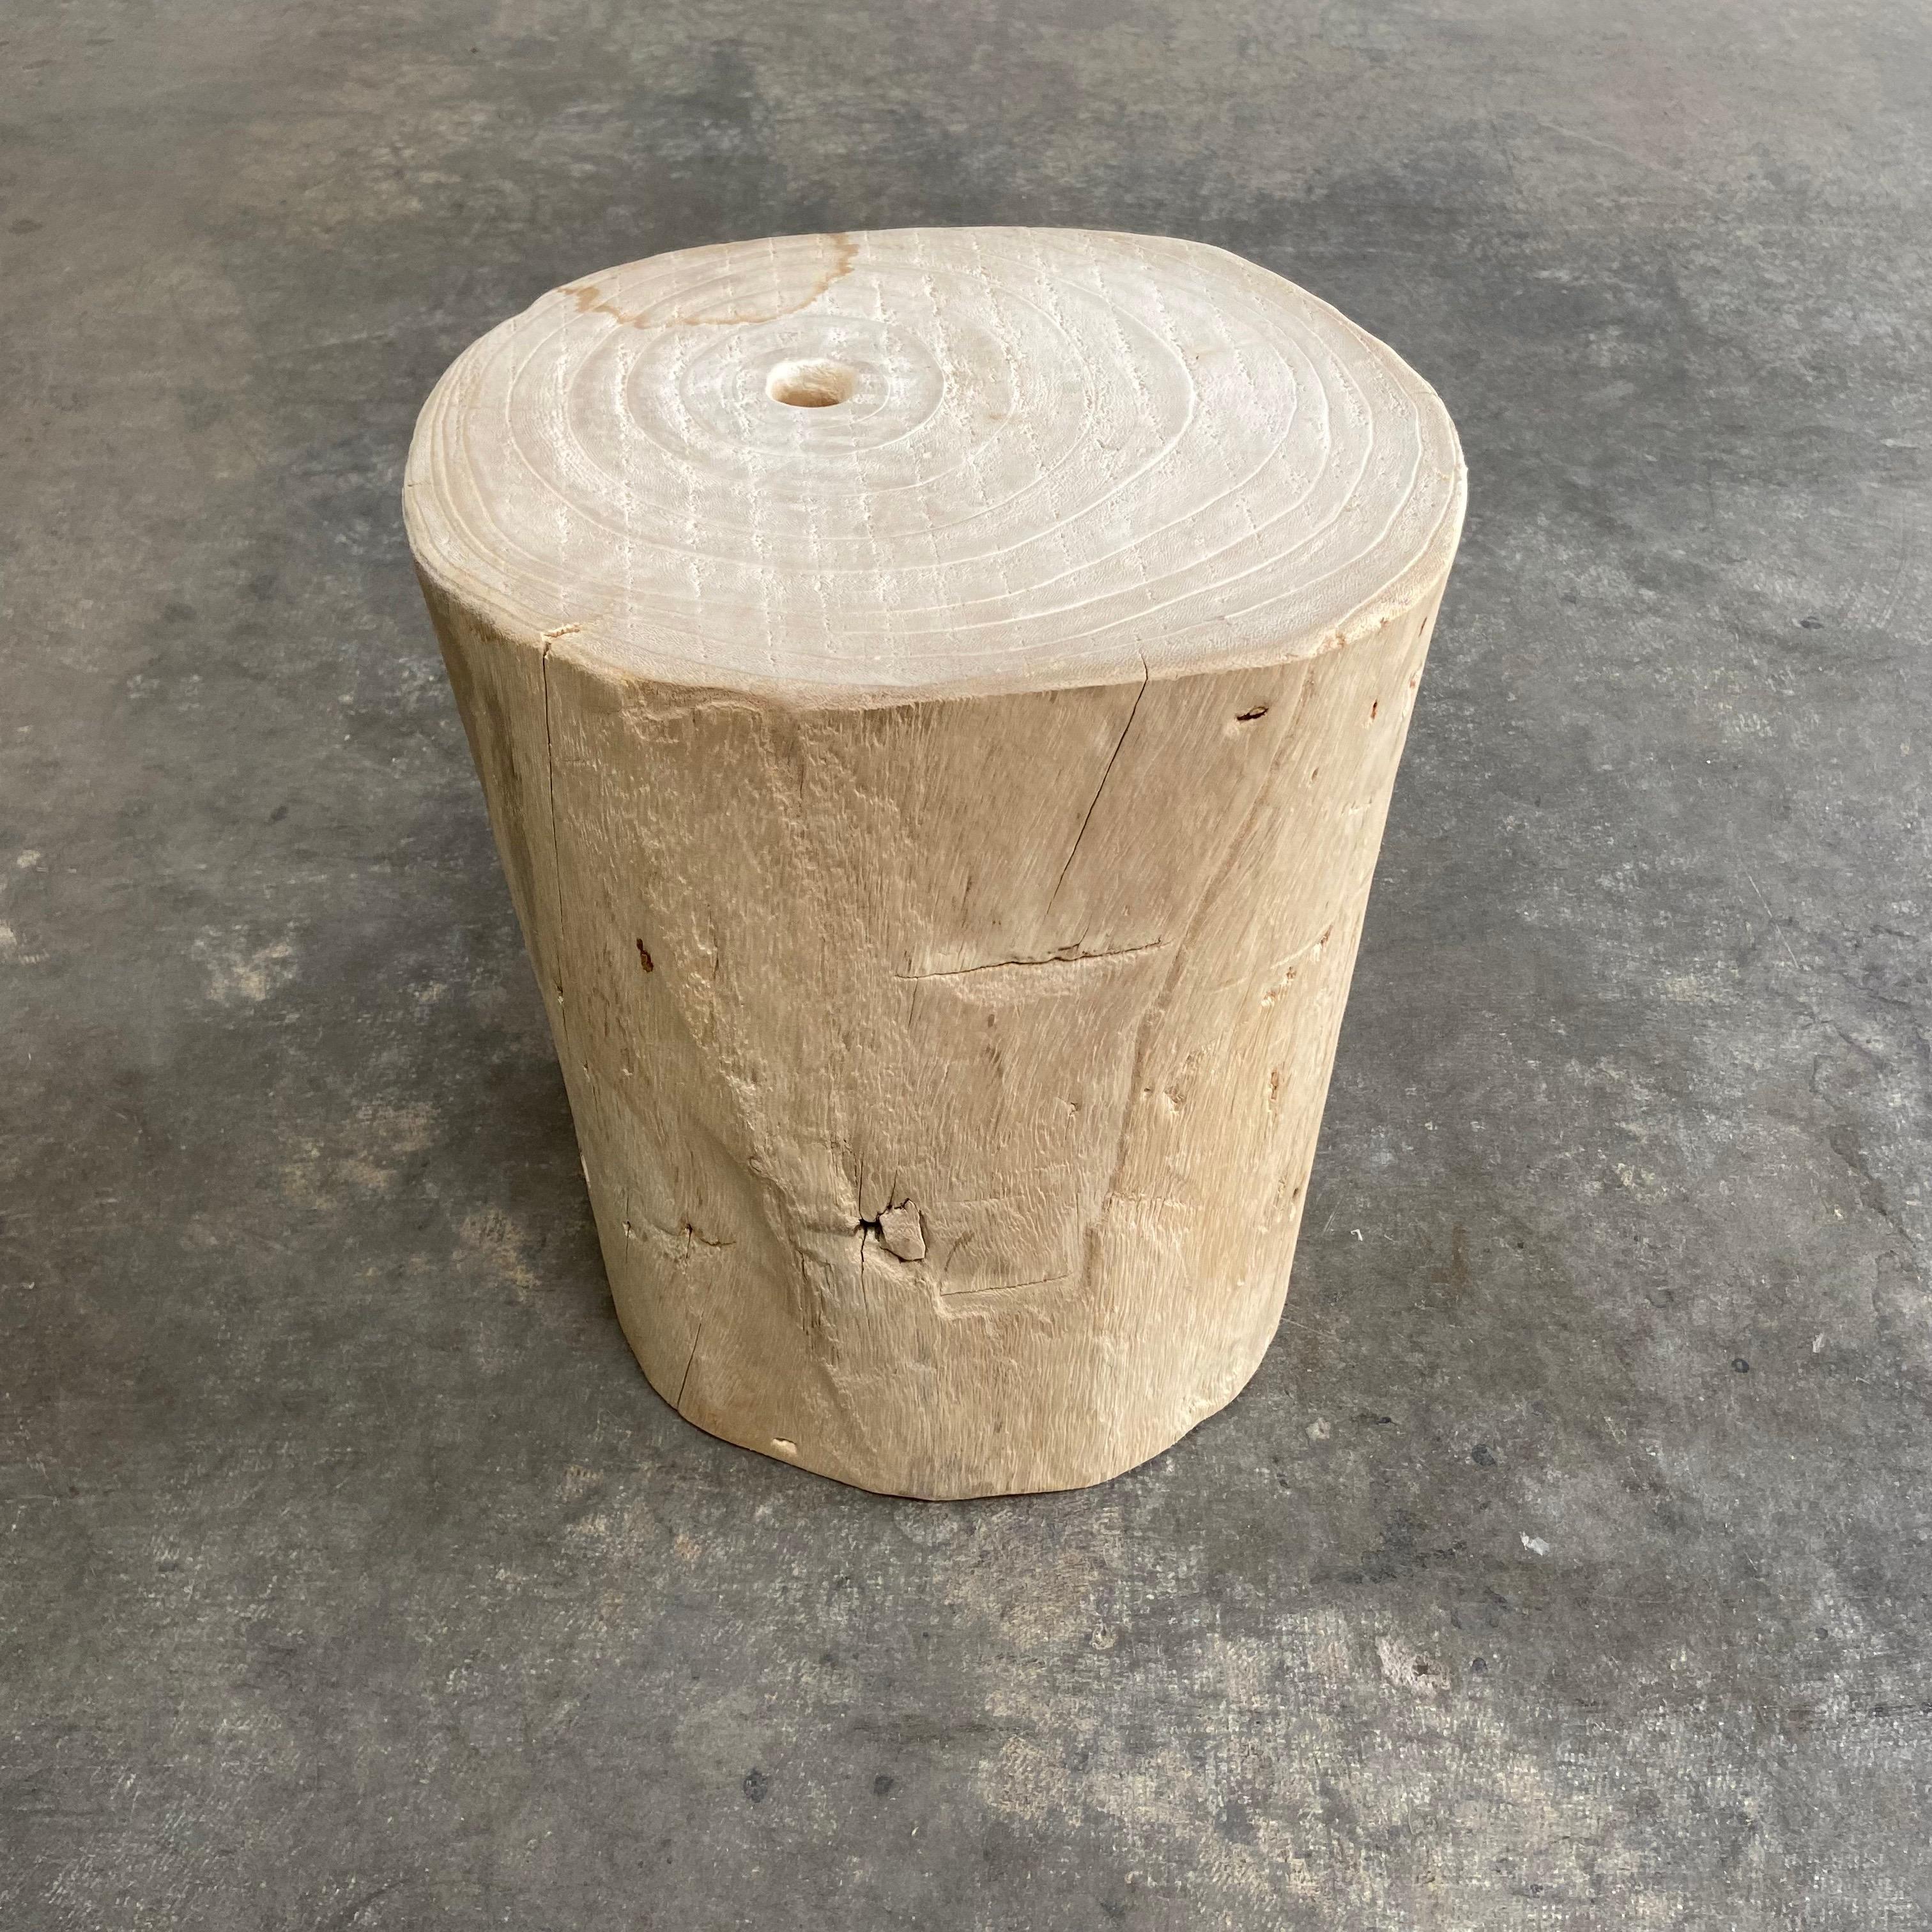 Natural wood side table stump. Beautiful solid stump, great for use as a side table, drink table, or bath.
Stump Size: 14”W x 12”D x 19”H.